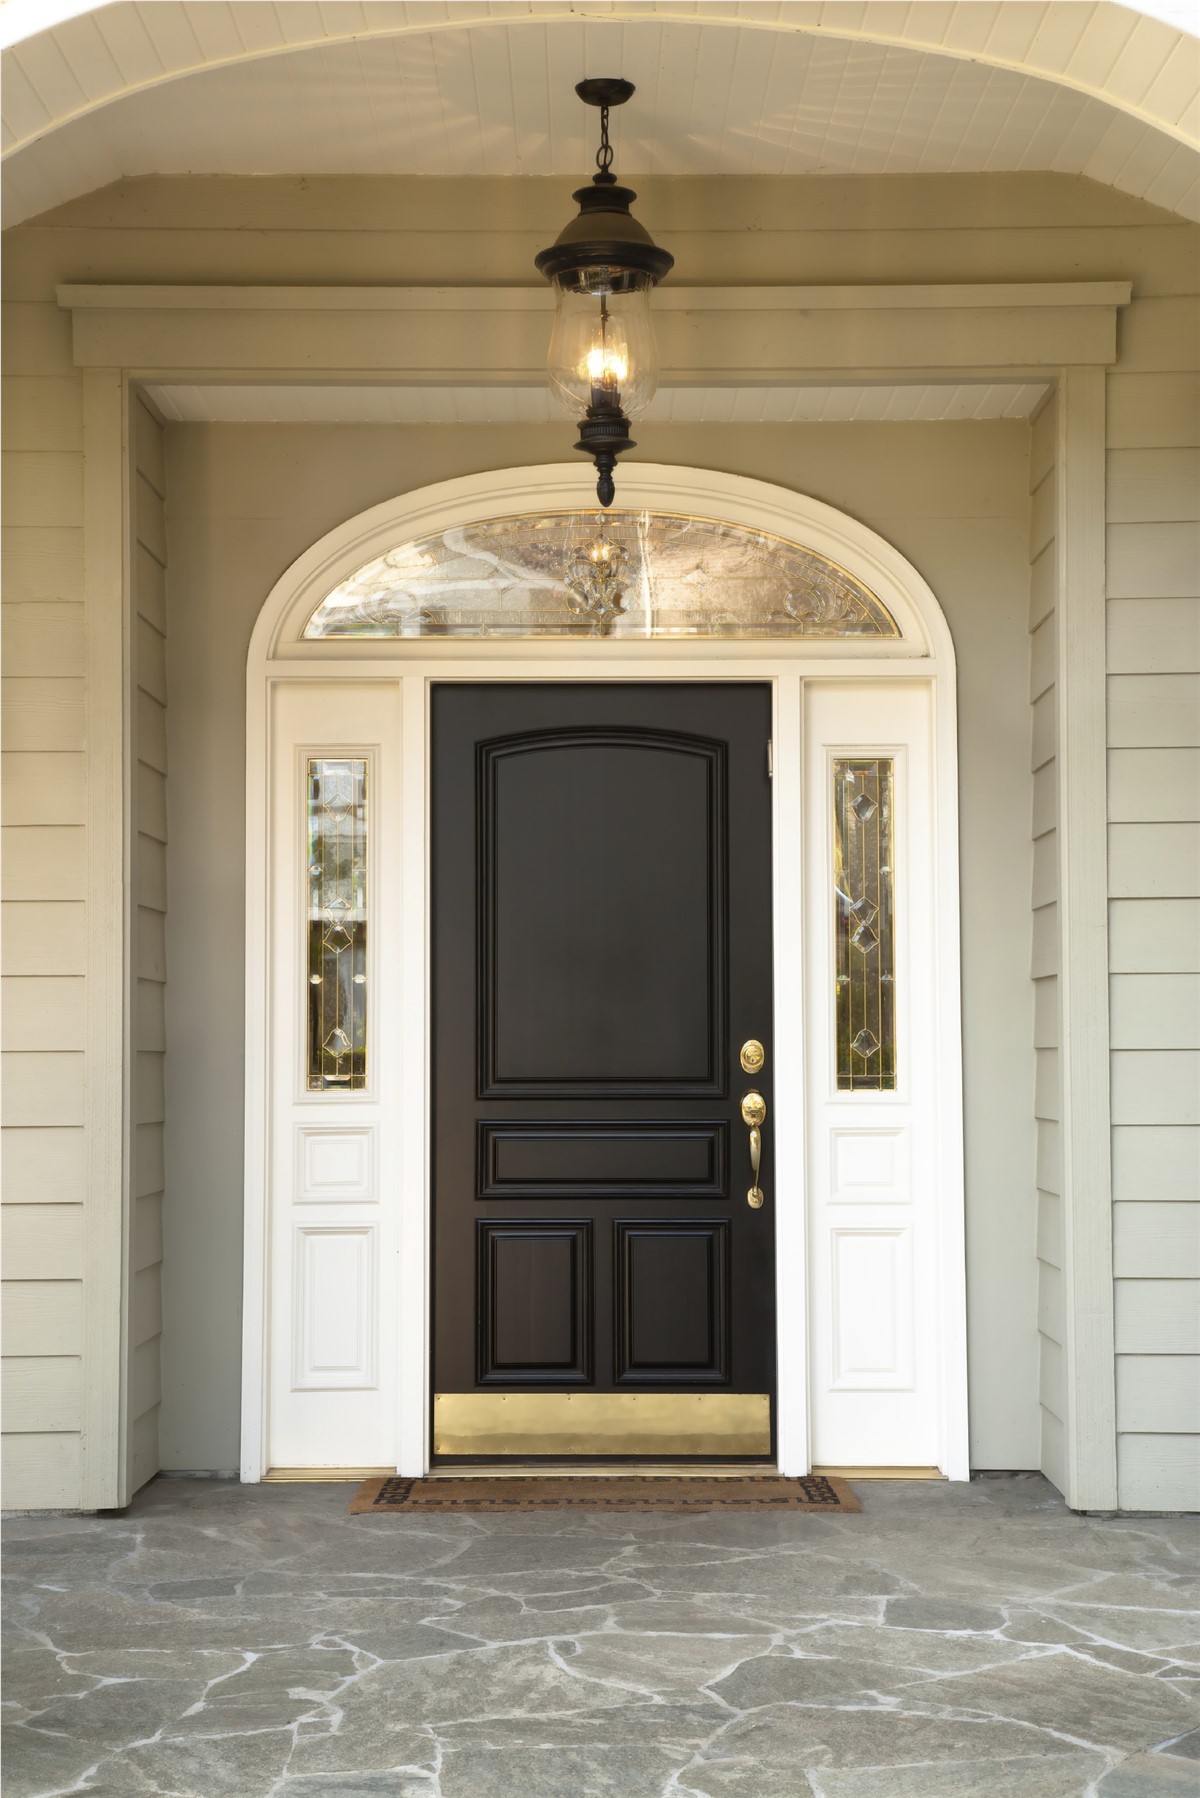 Top Reasons to Replace Your Home's Entry Doors